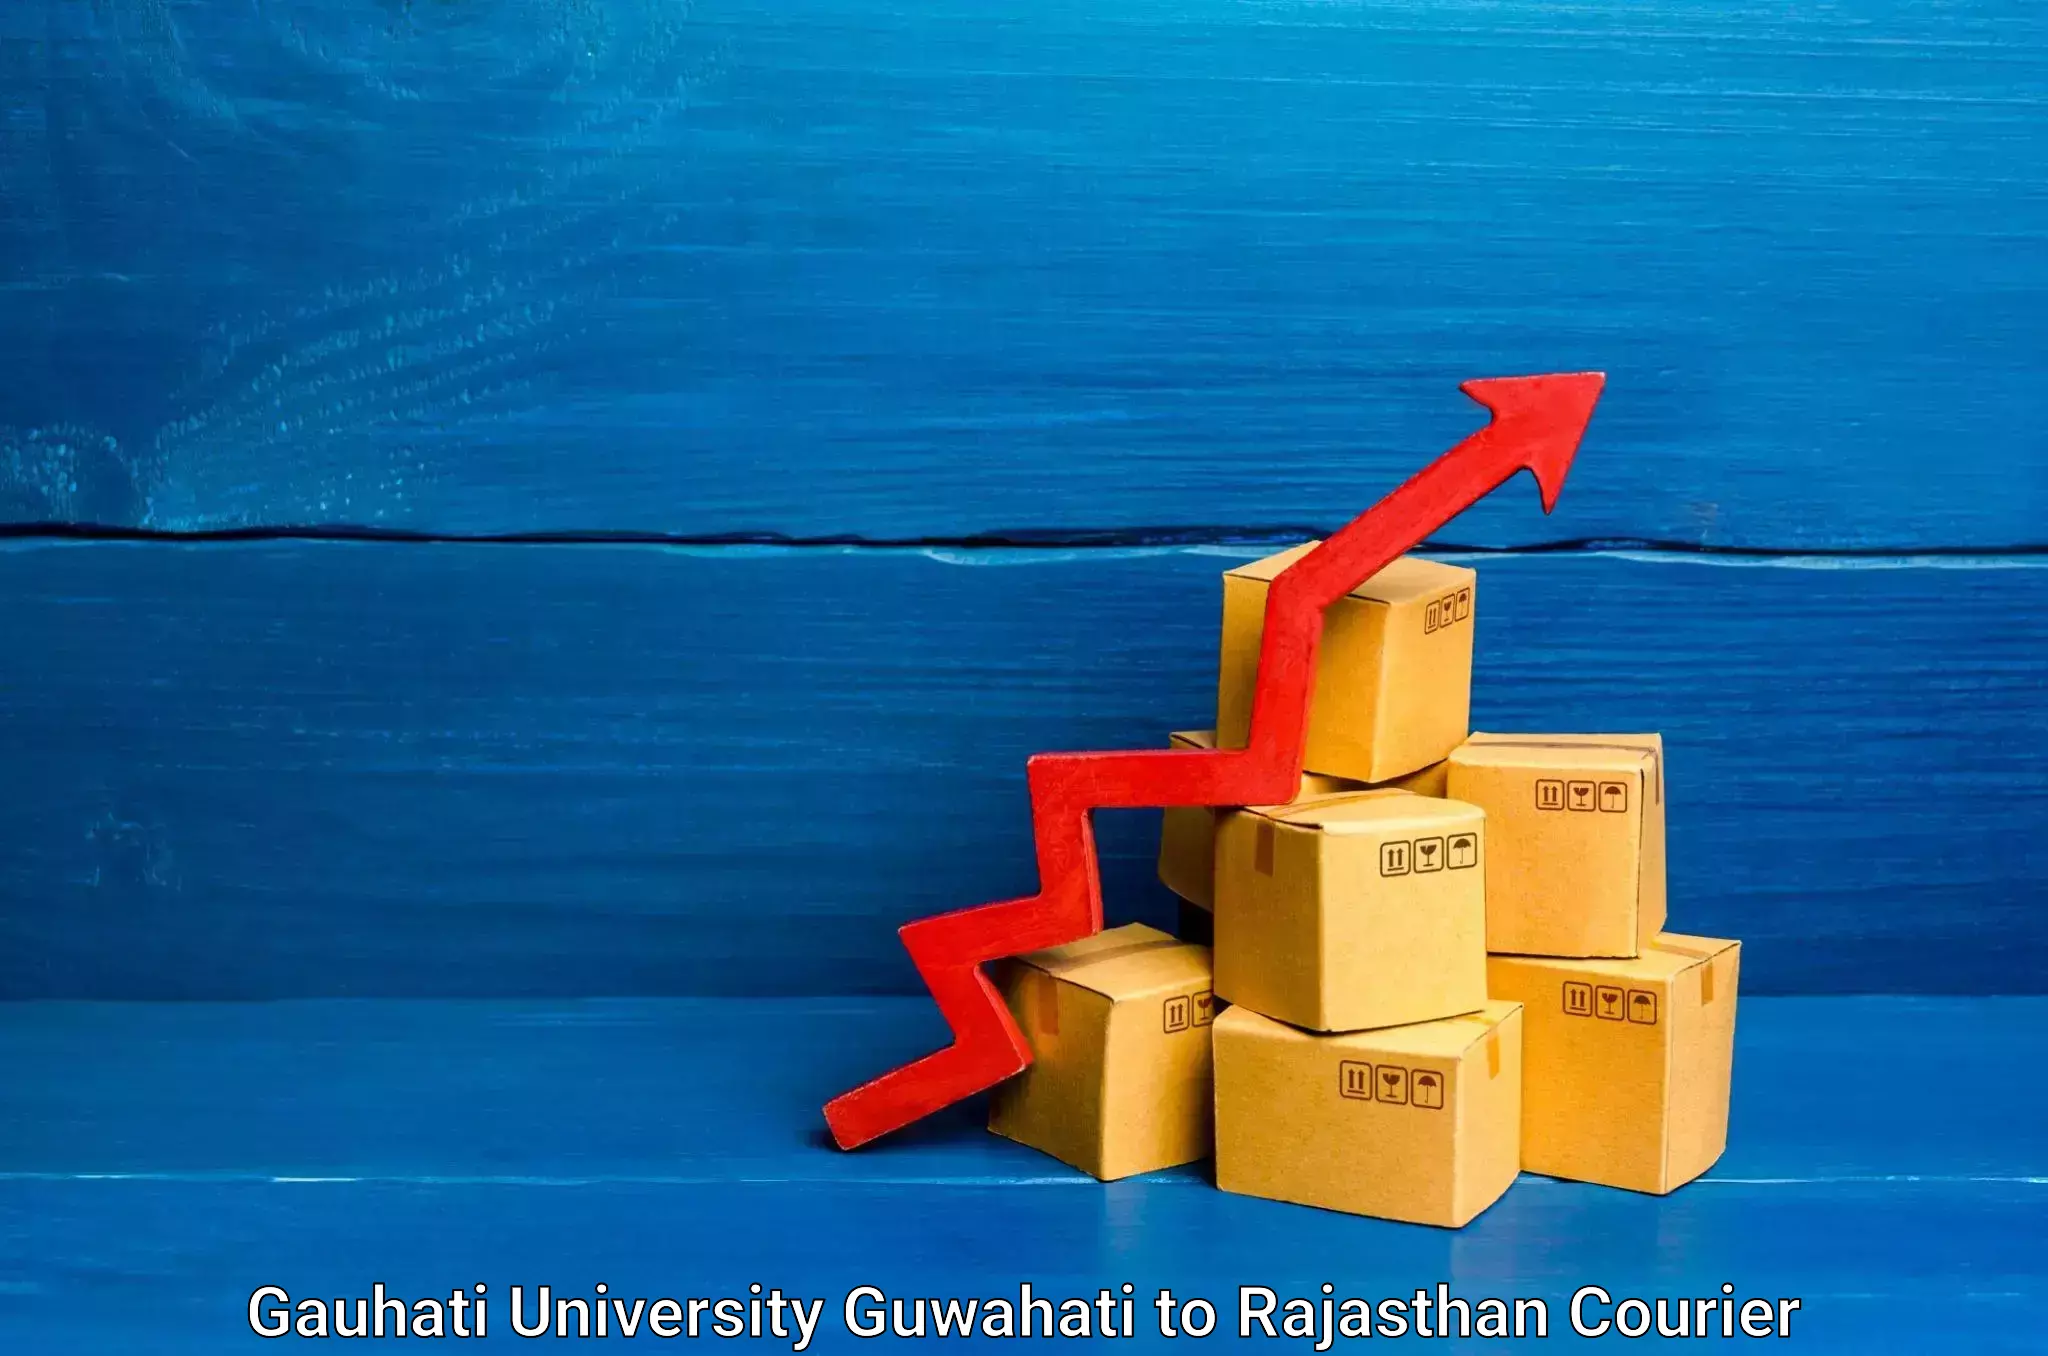 Package delivery network Gauhati University Guwahati to Weir